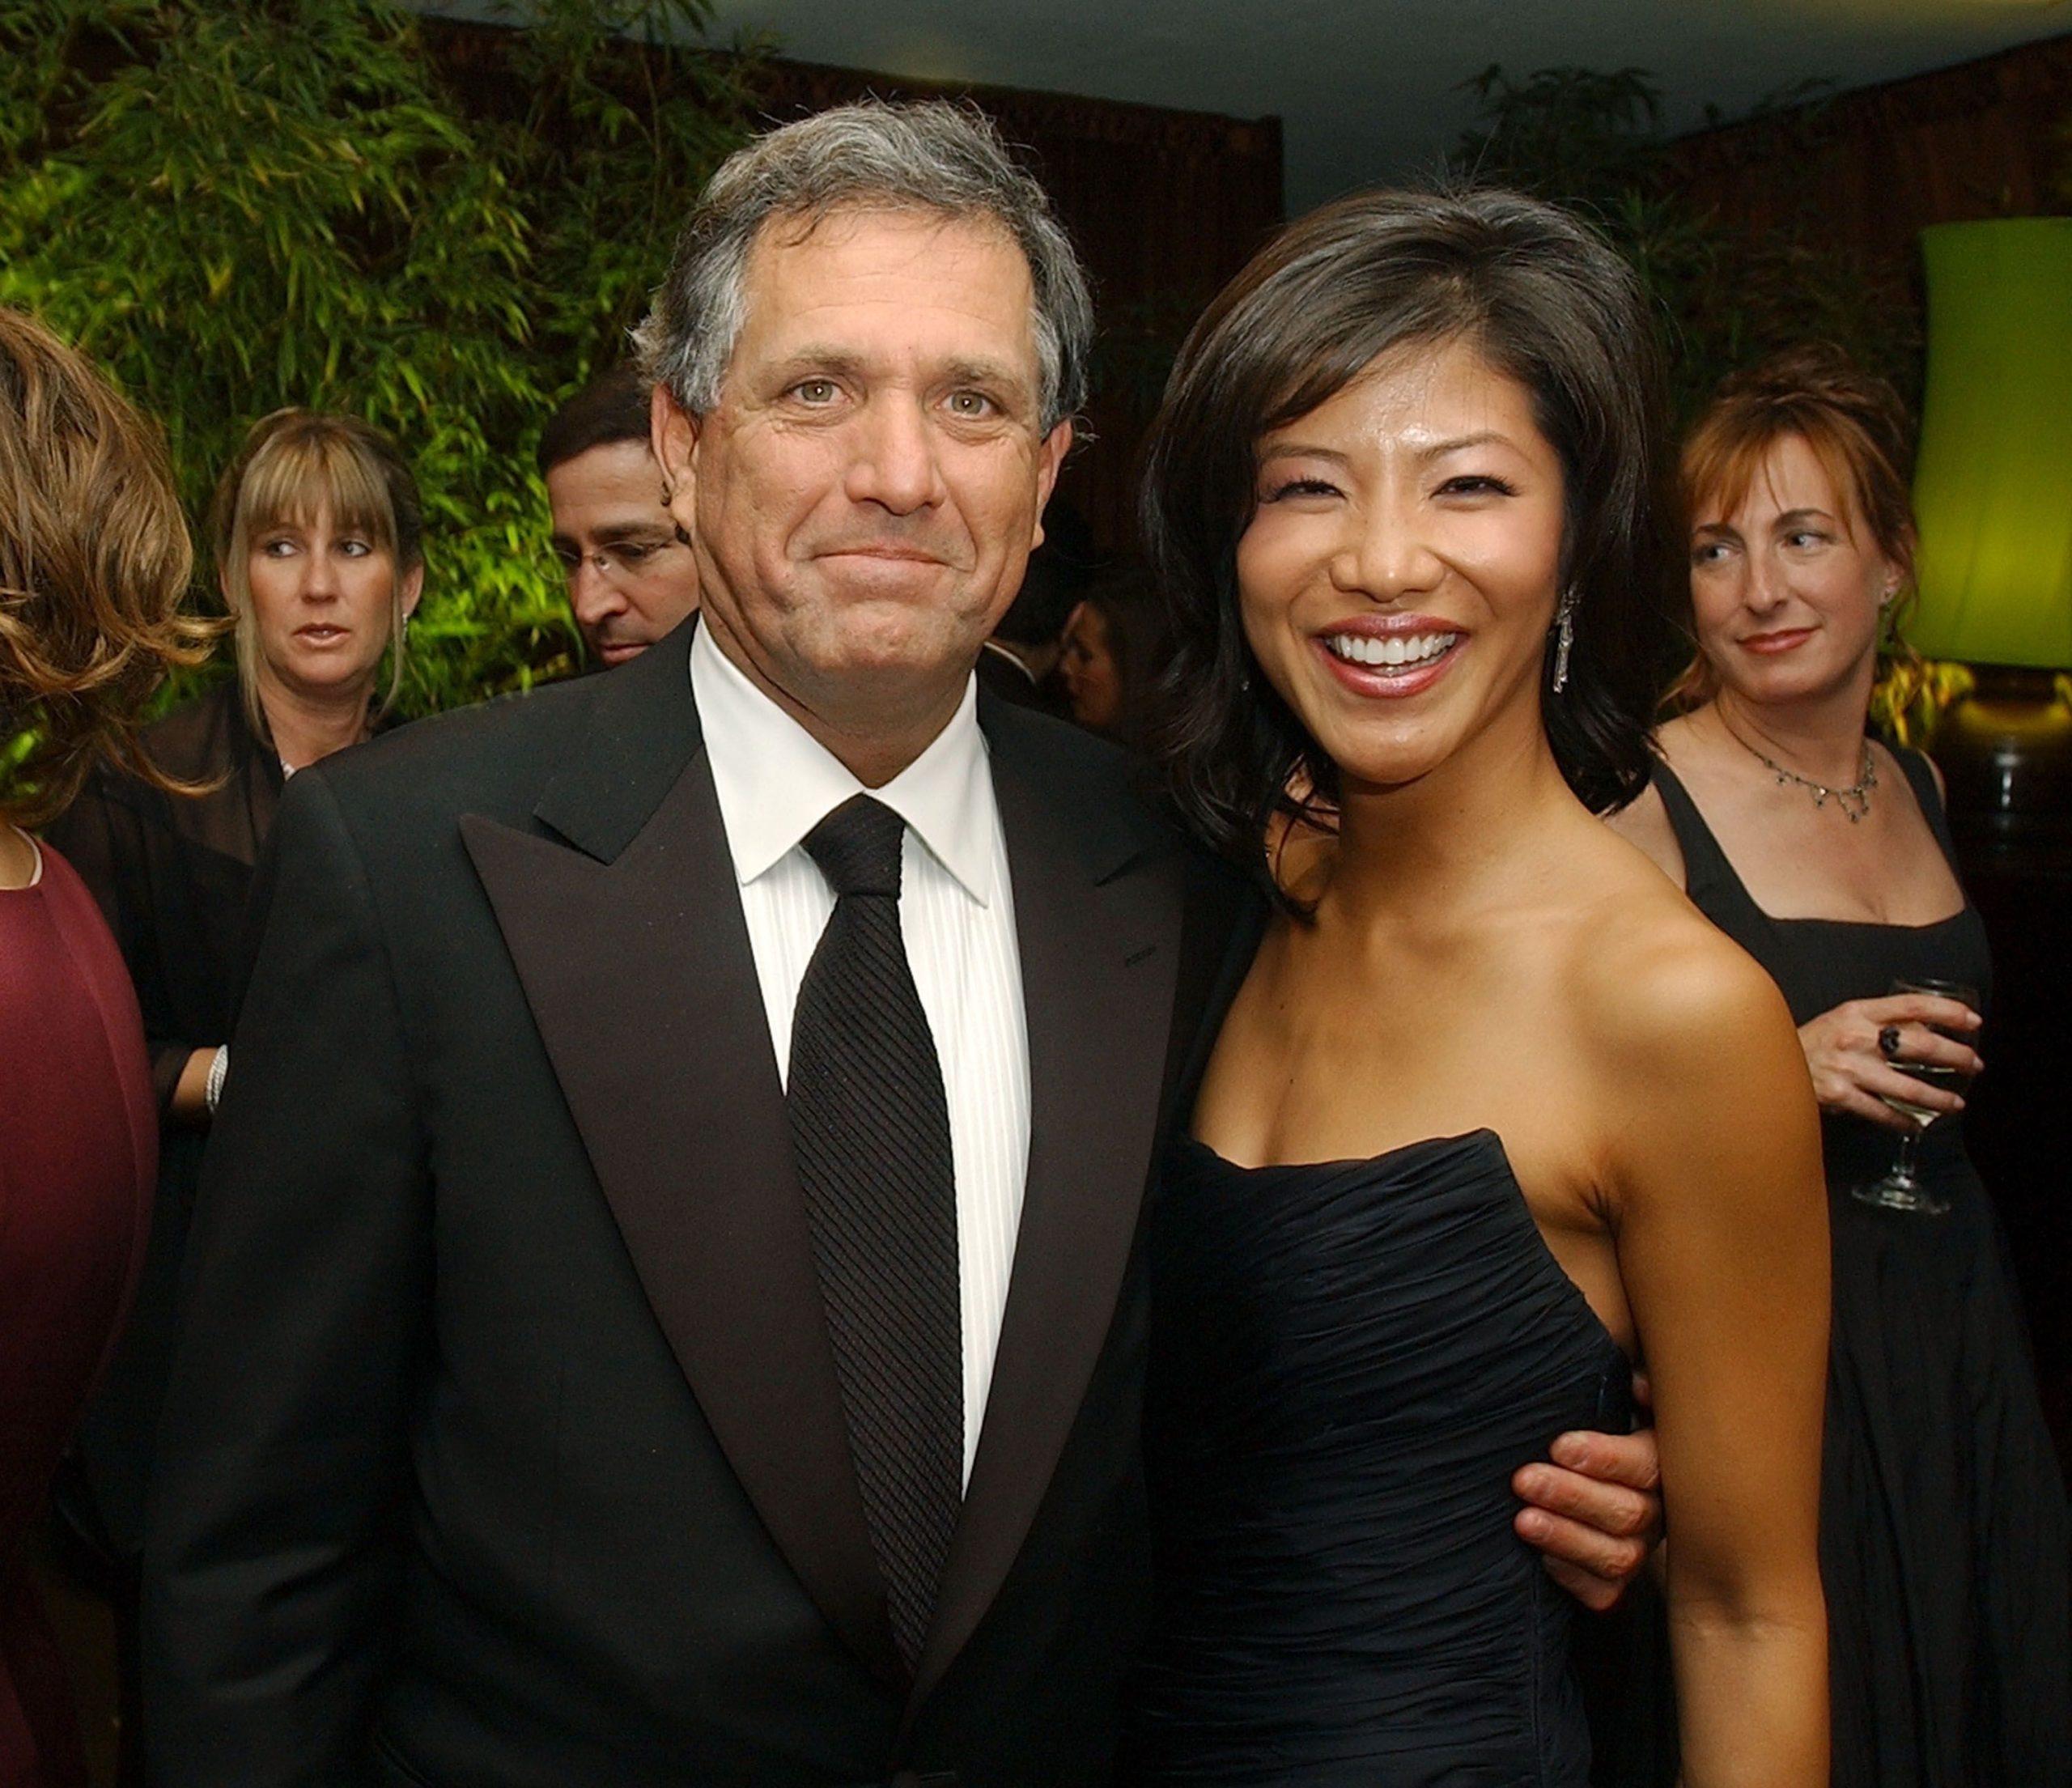 how old is julie chen moonves